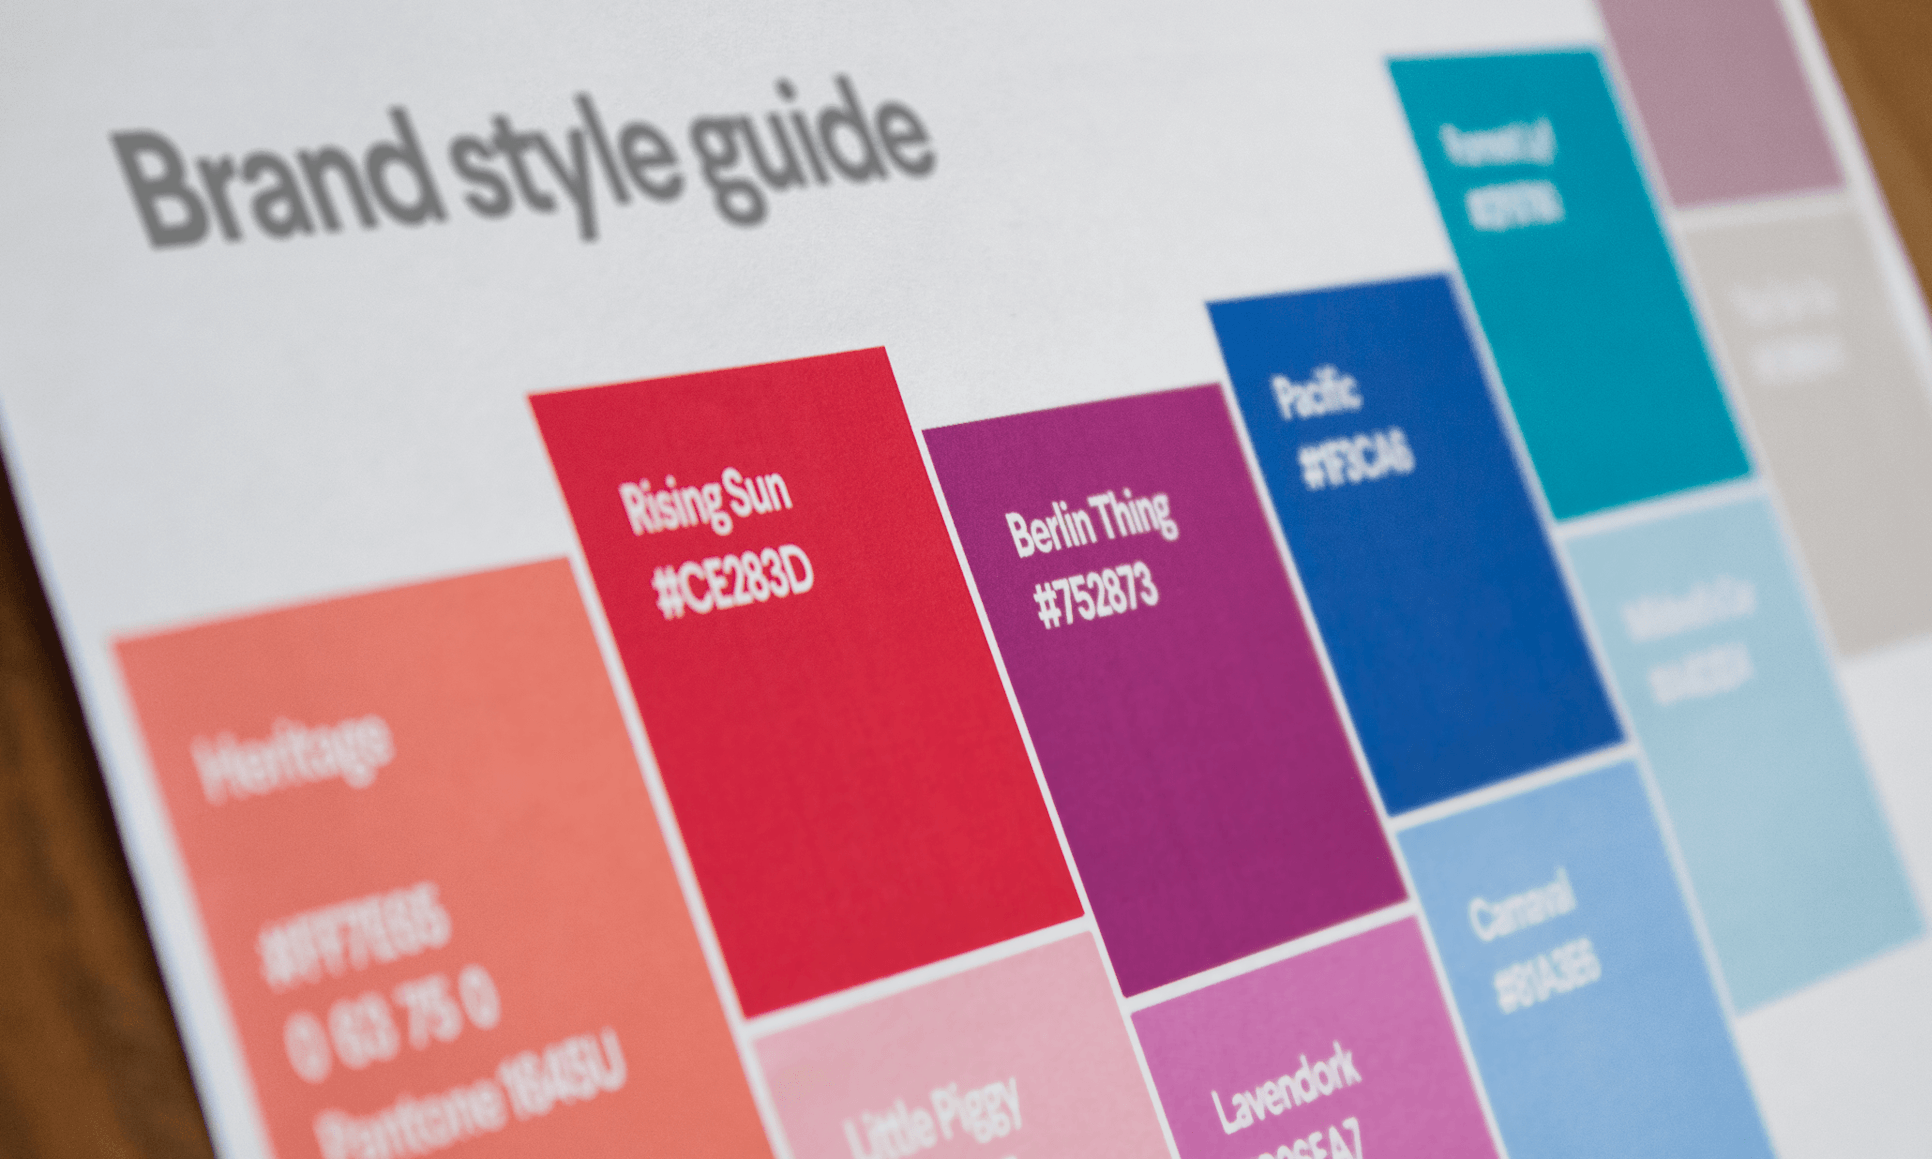 Building a Brand Style Guide: How to Create Your Color Palette